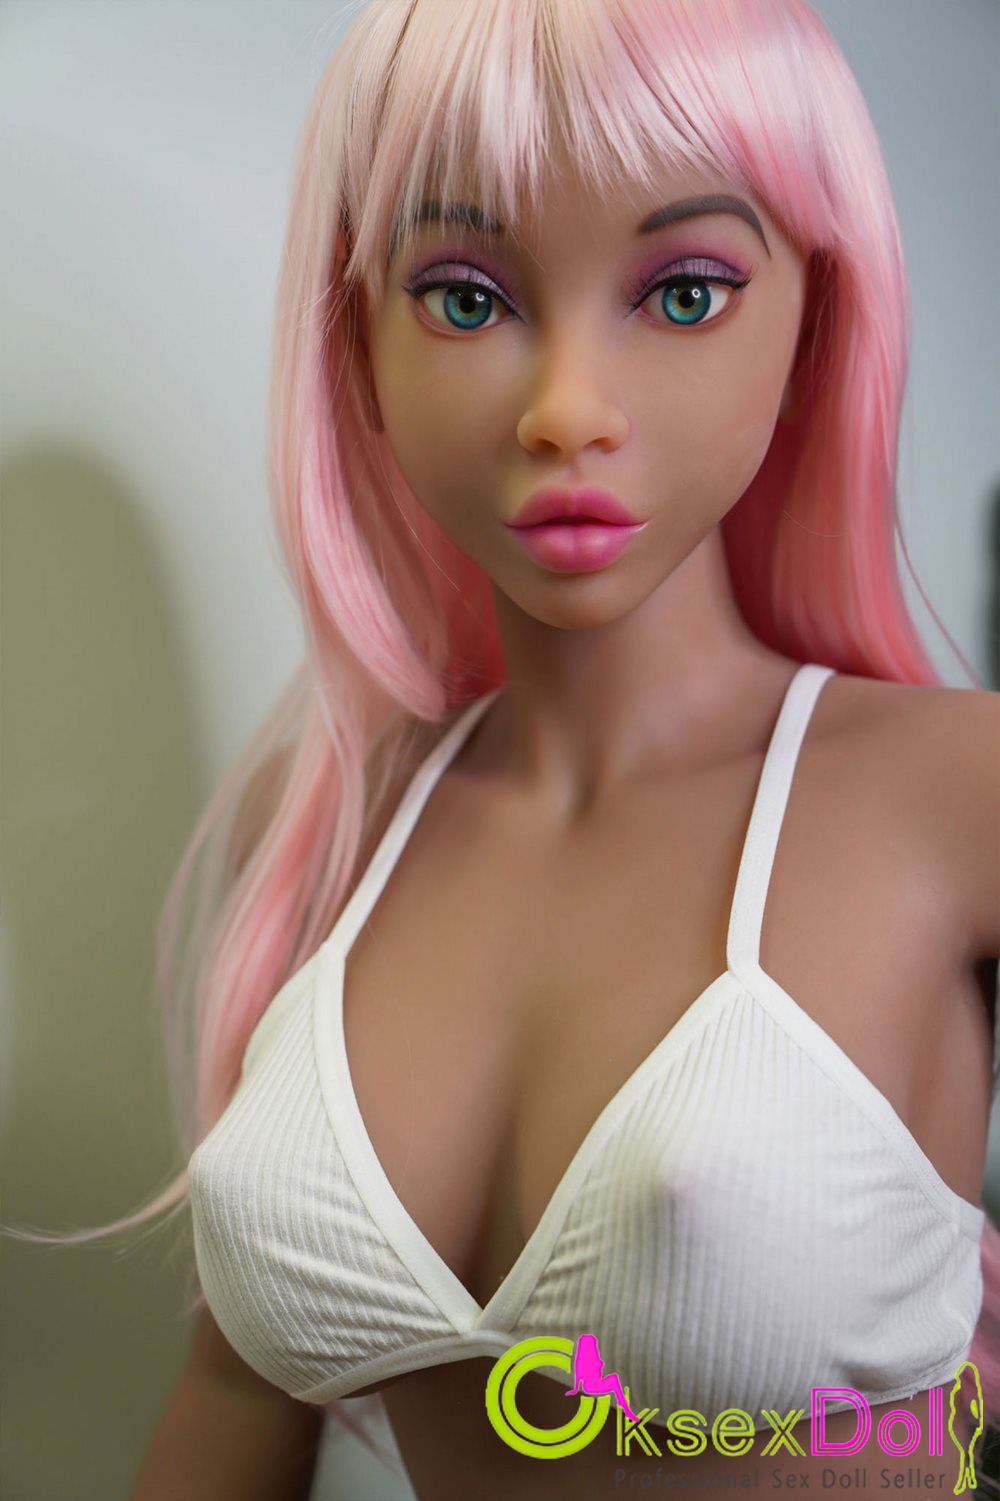 Black Teen Sex Doll images